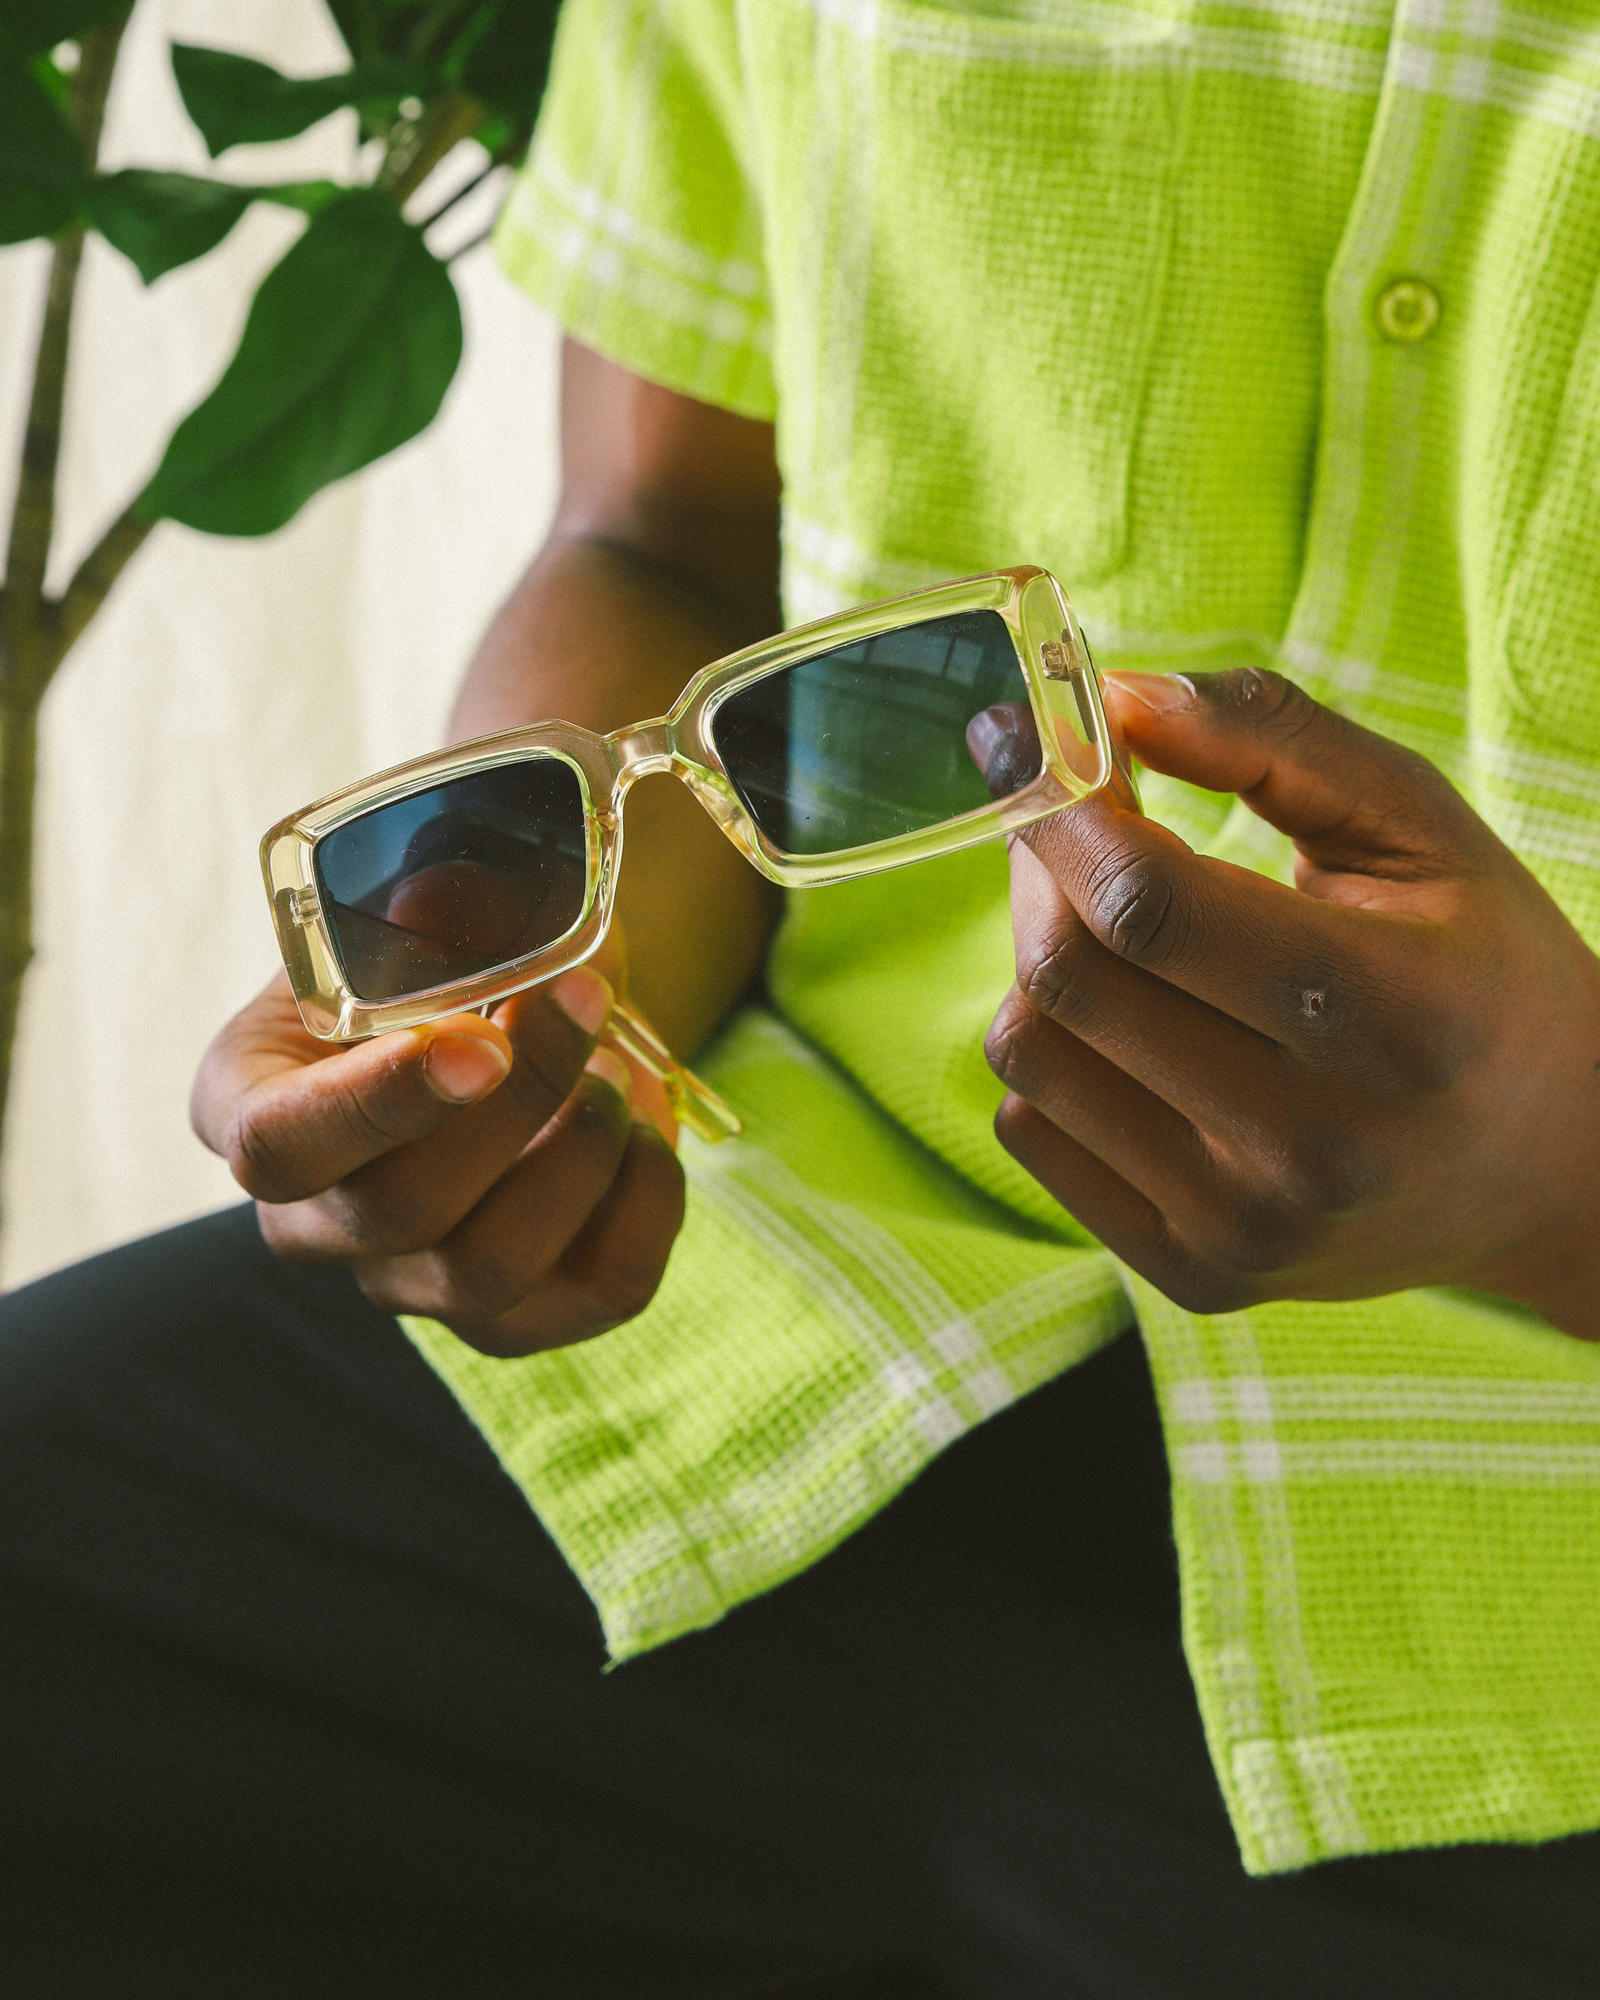  Giveaway: Win a pair of Komono sunglasses + a matching cord
